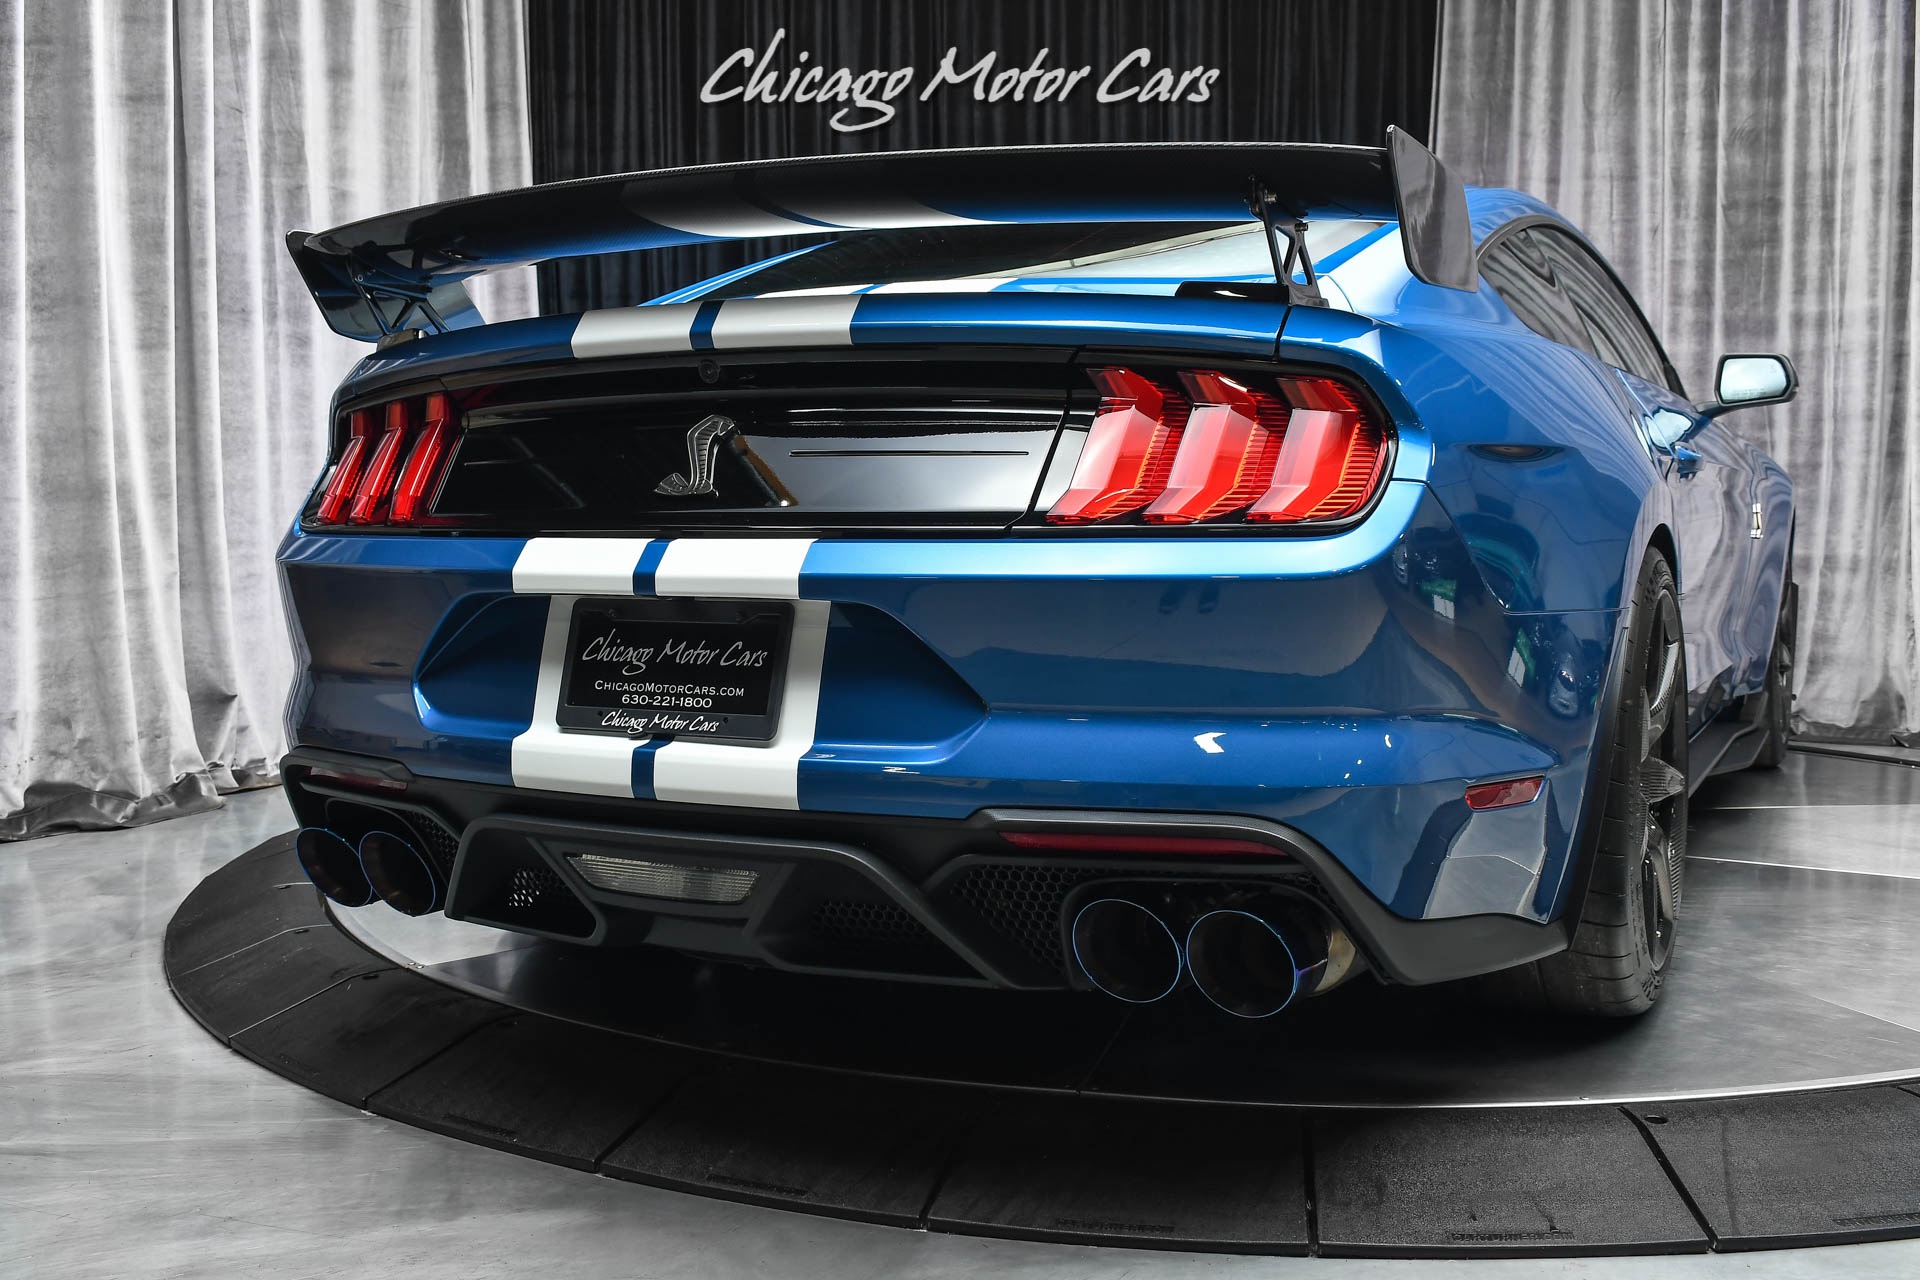 Used-2020-Ford-Mustang-Shelby-GT500-Golden-Ticket-RARE-Loaded-Carbon-Track-Package-Borla-Exhaust